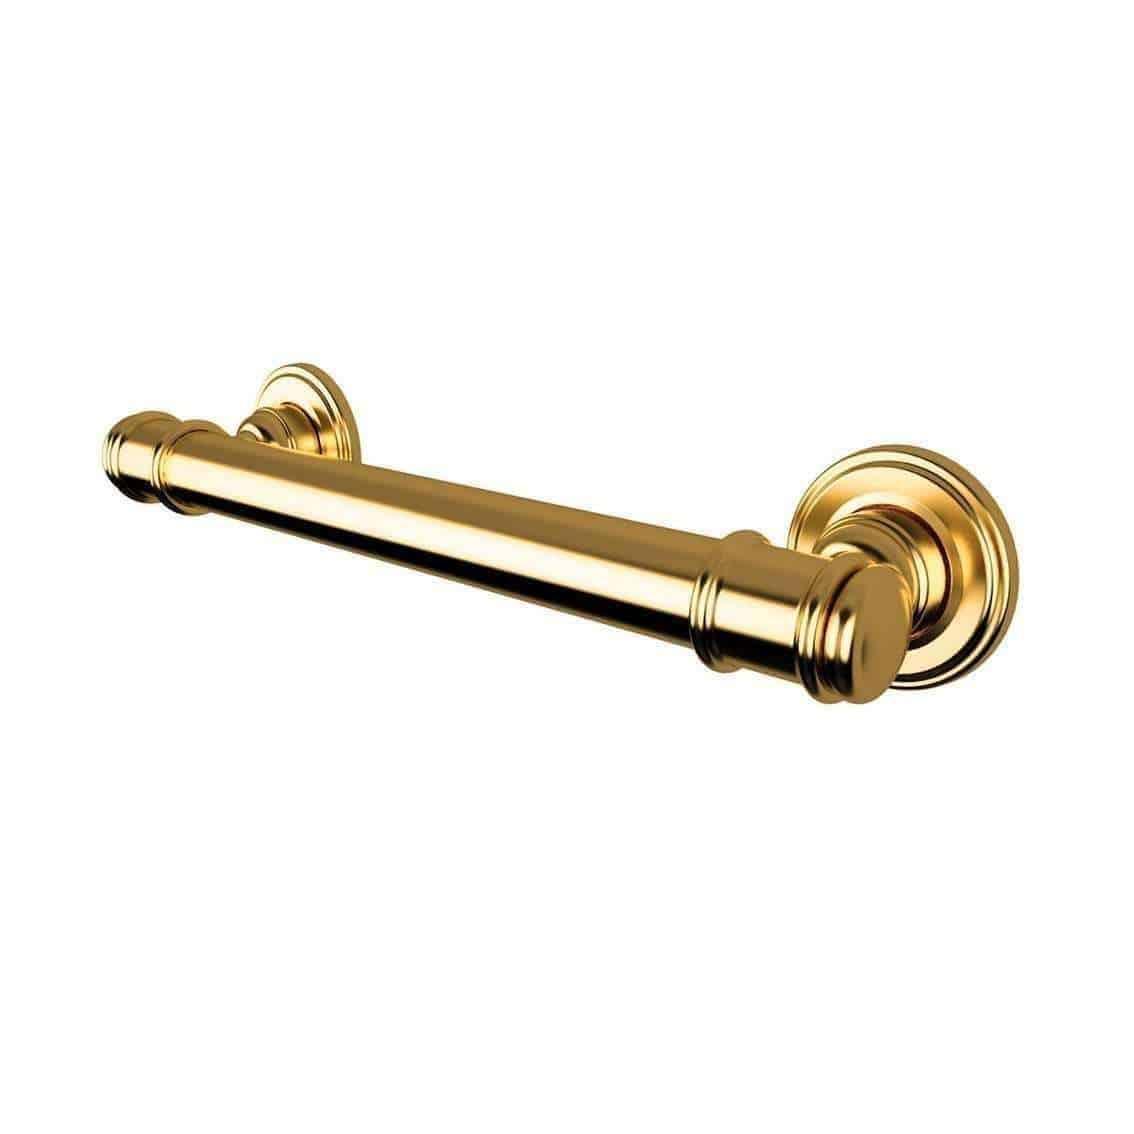 Availcare Glance Rail 300mm Gold - Burdens Plumbing